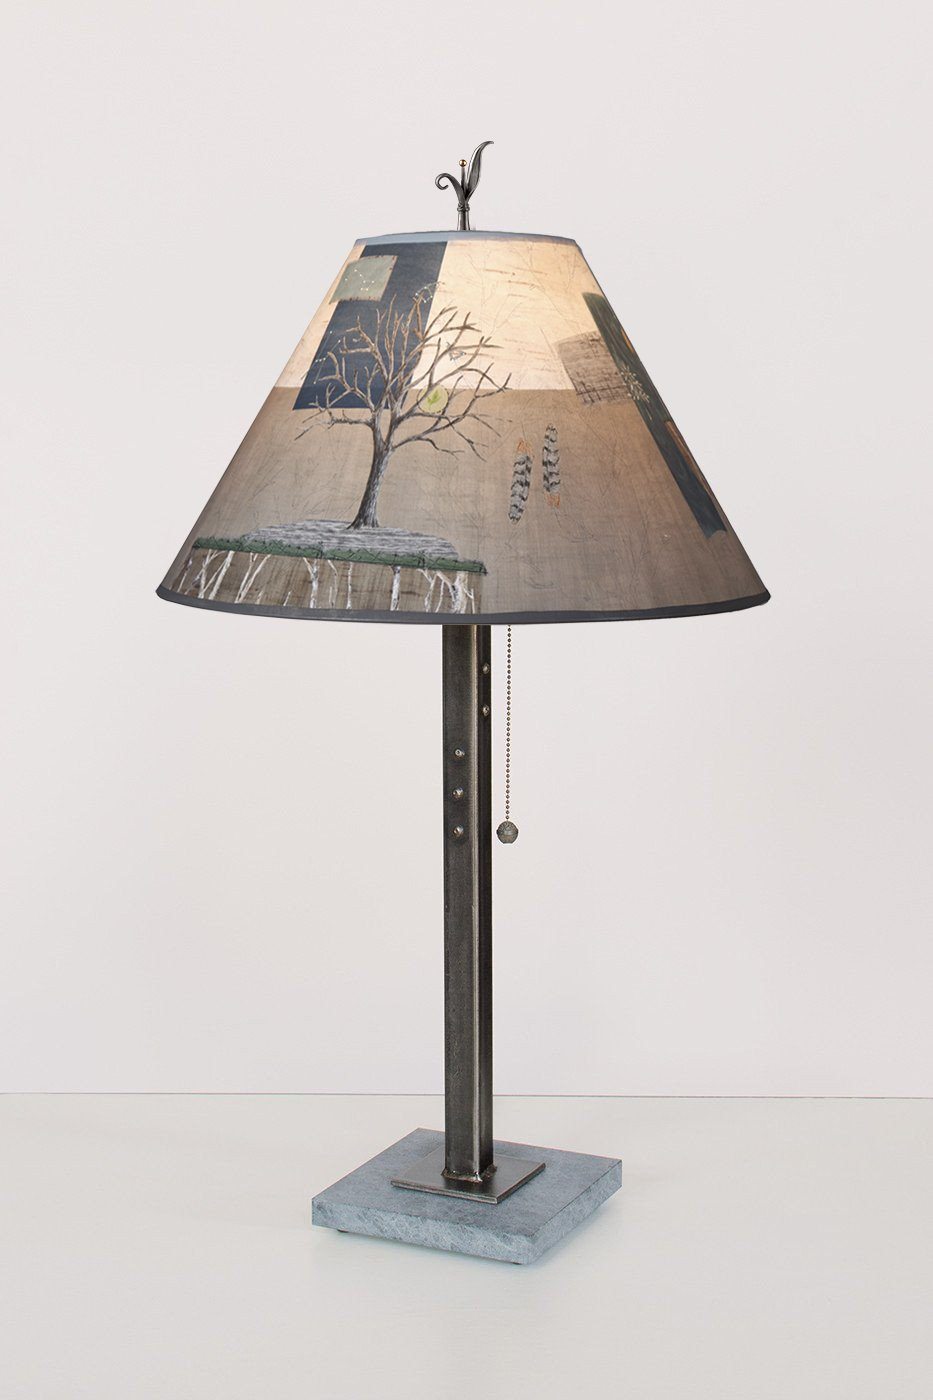 Janna Ugone & Co Table Lamps Steel Table Lamp with Medium Conical Shade in Wander in Drift